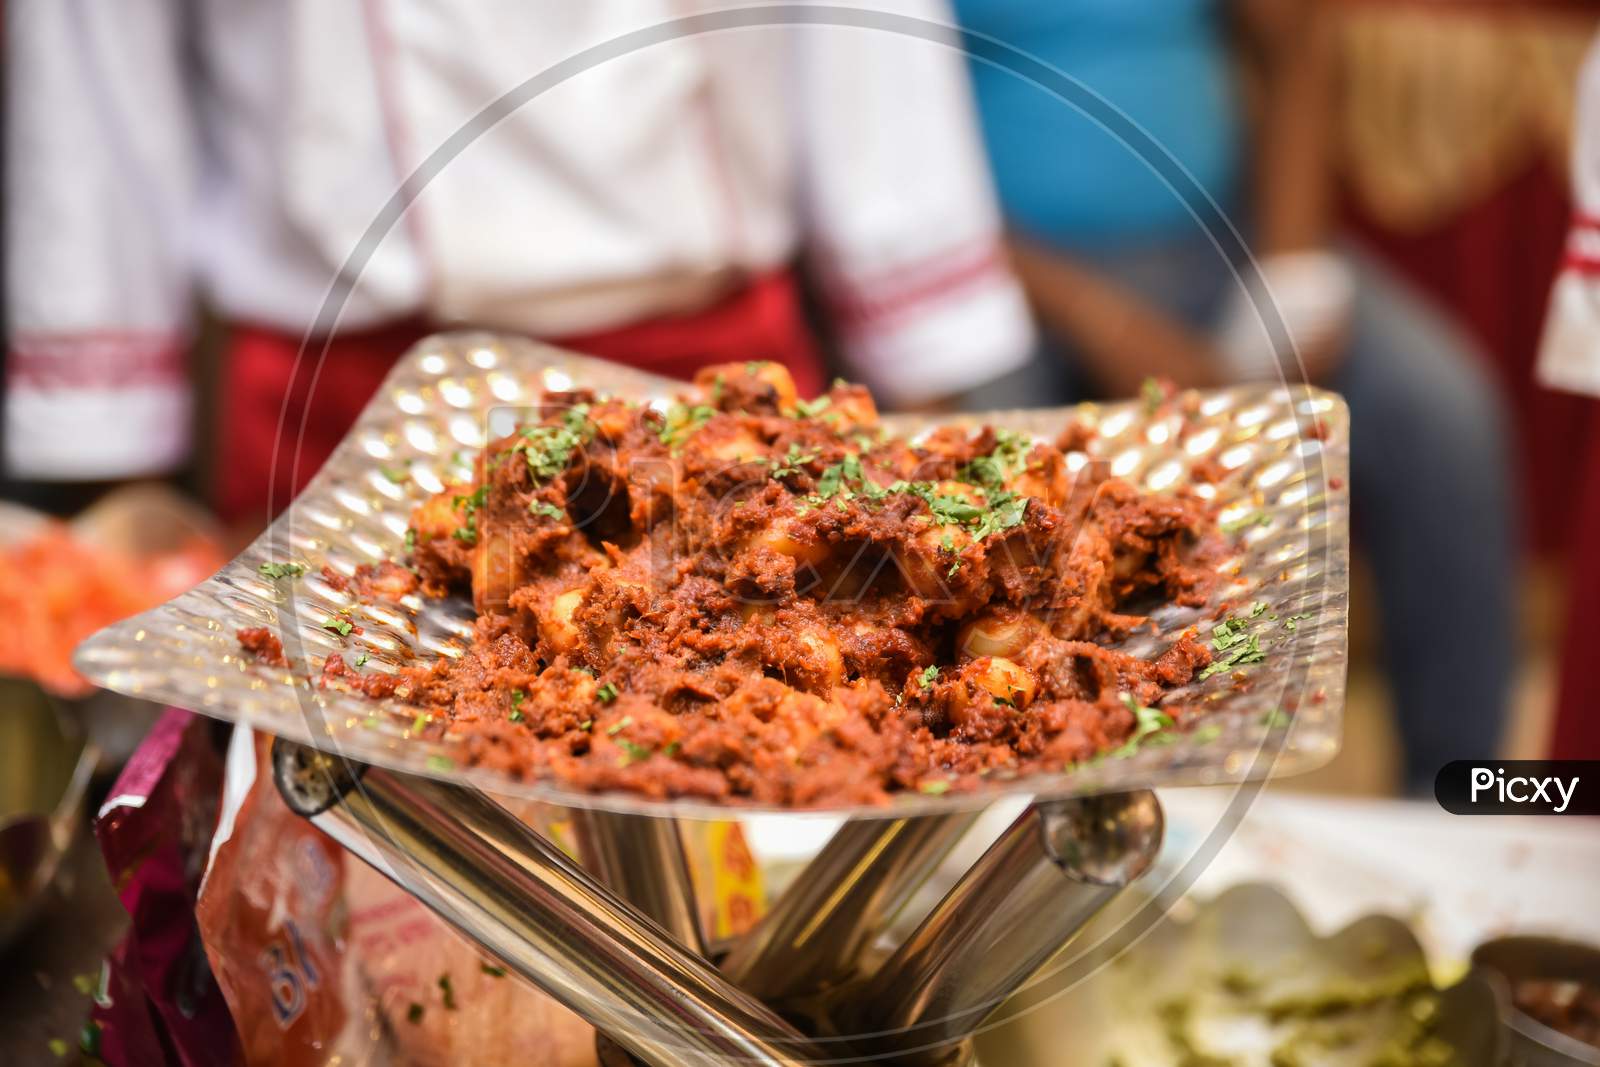 Spicy alu dum served in Indian wedding event in India